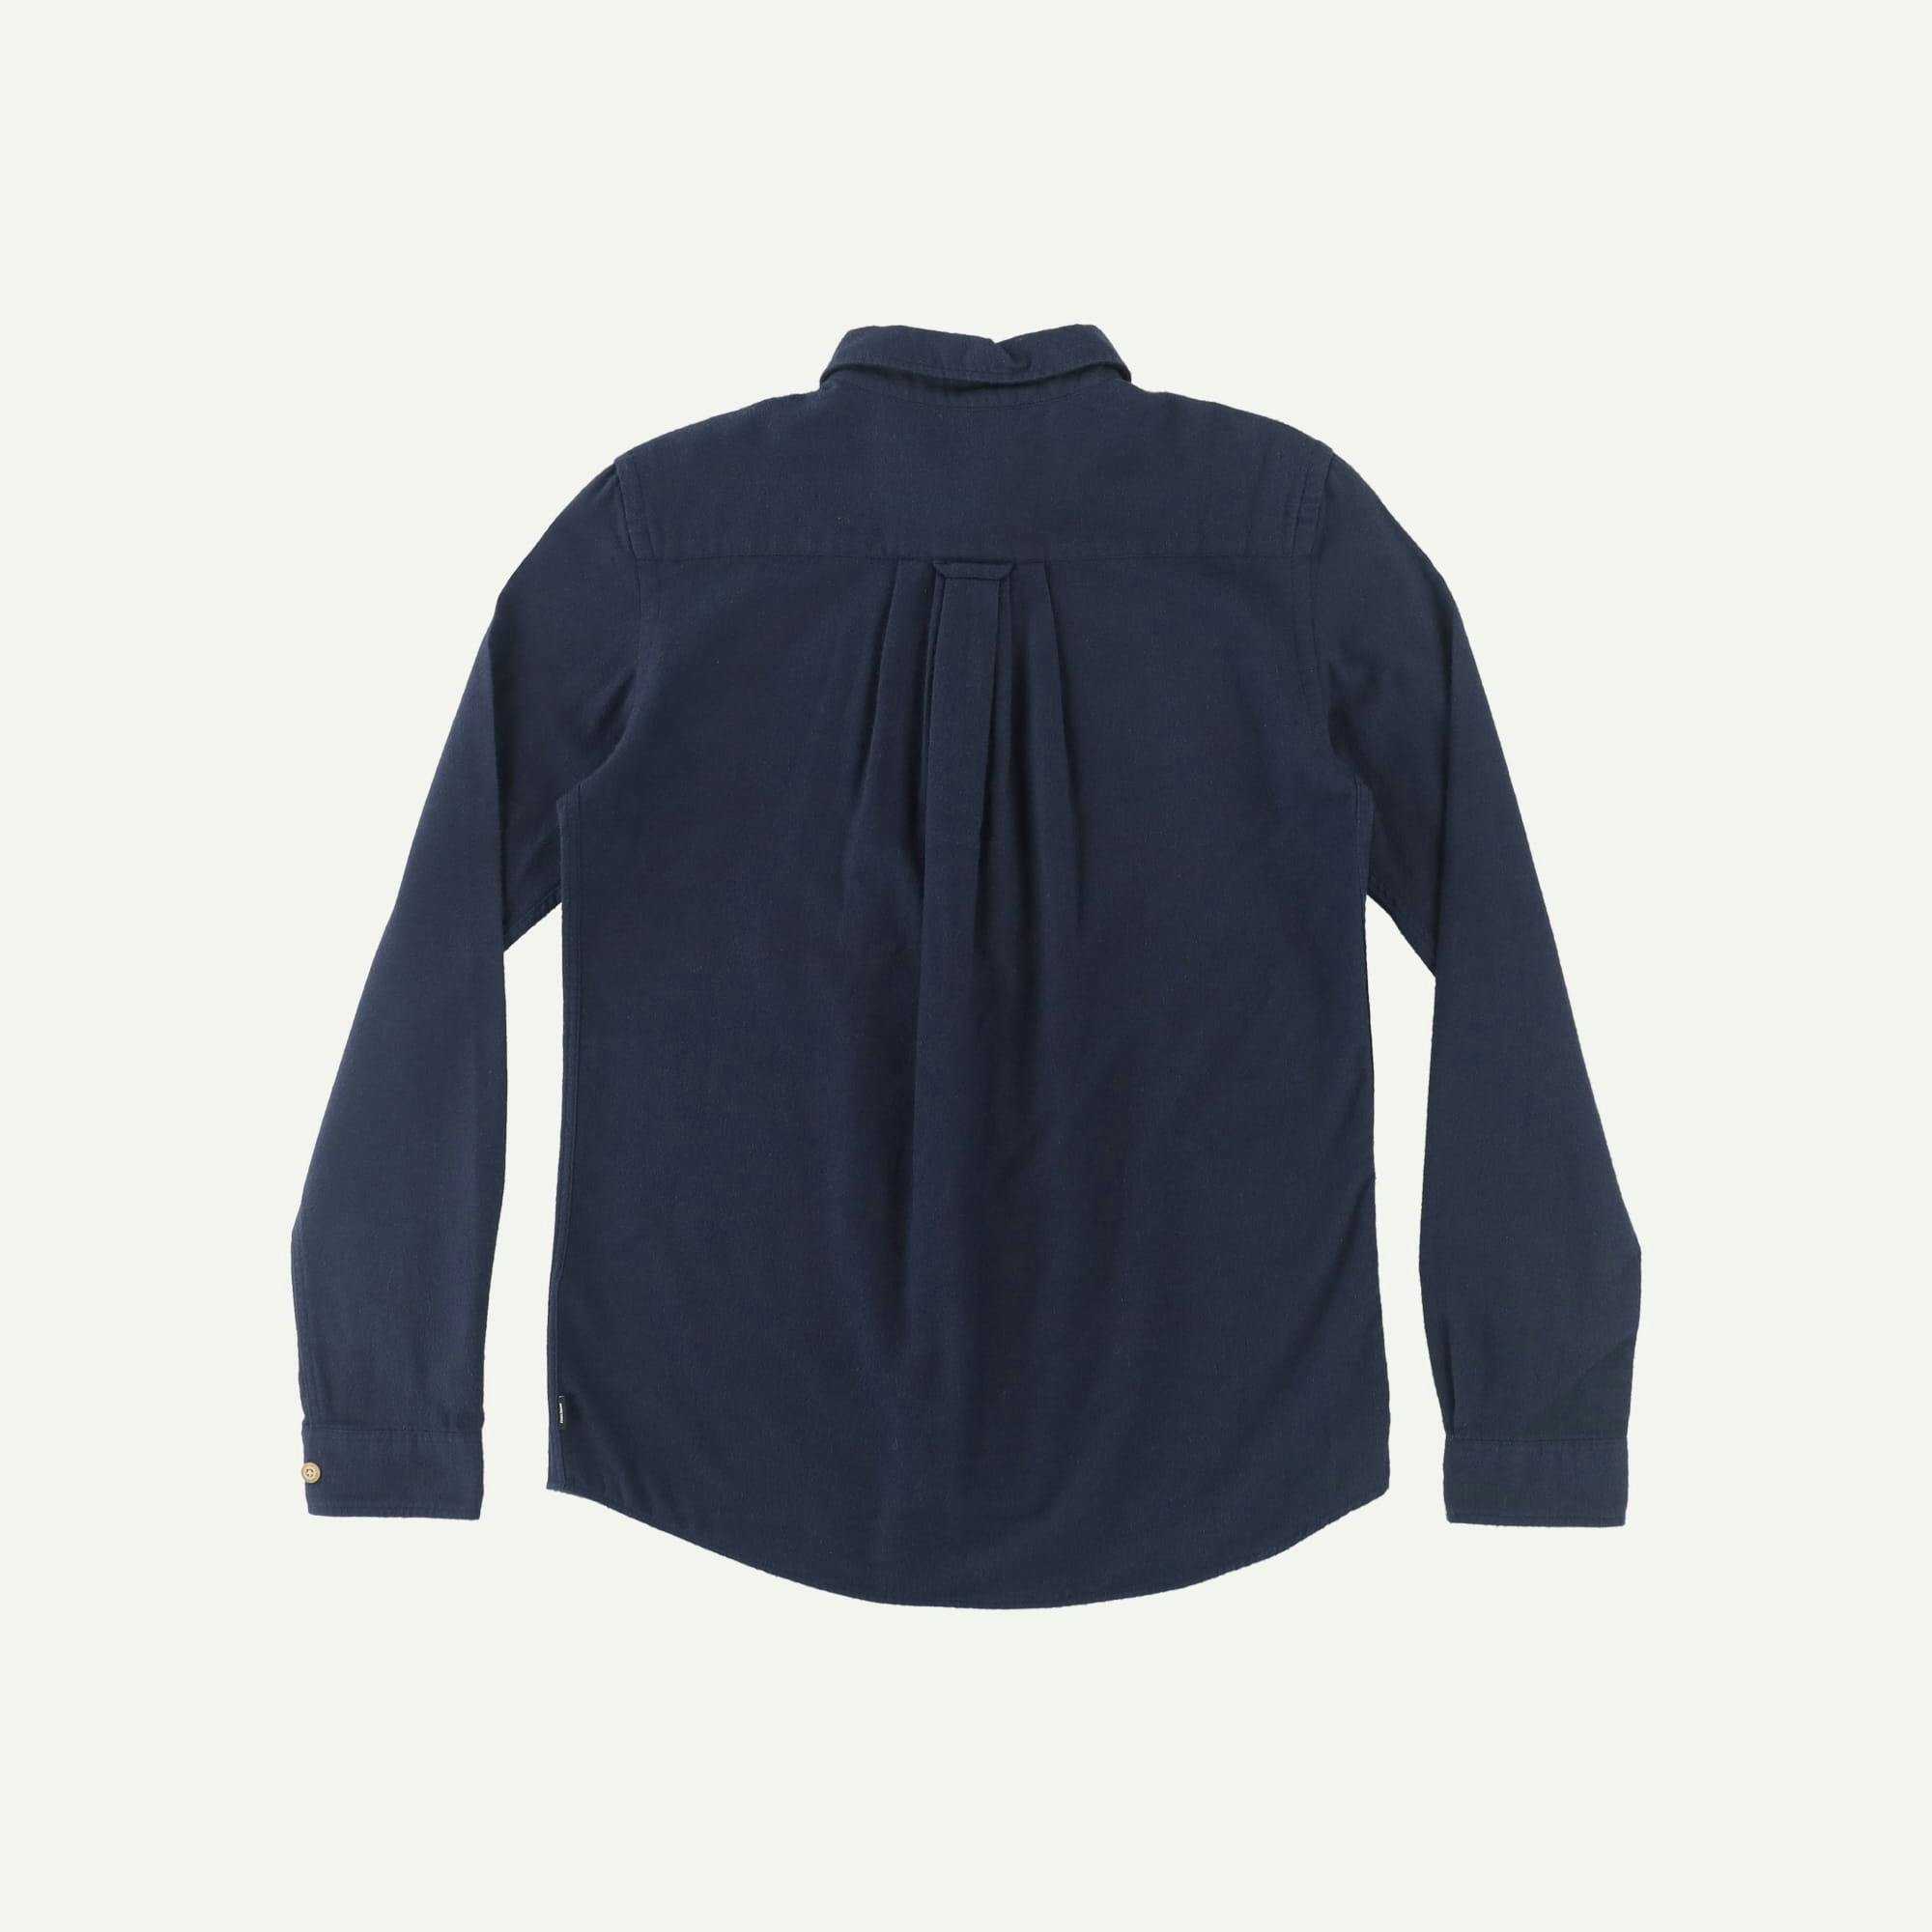 Finisterre As new Navy Lantic Shirt